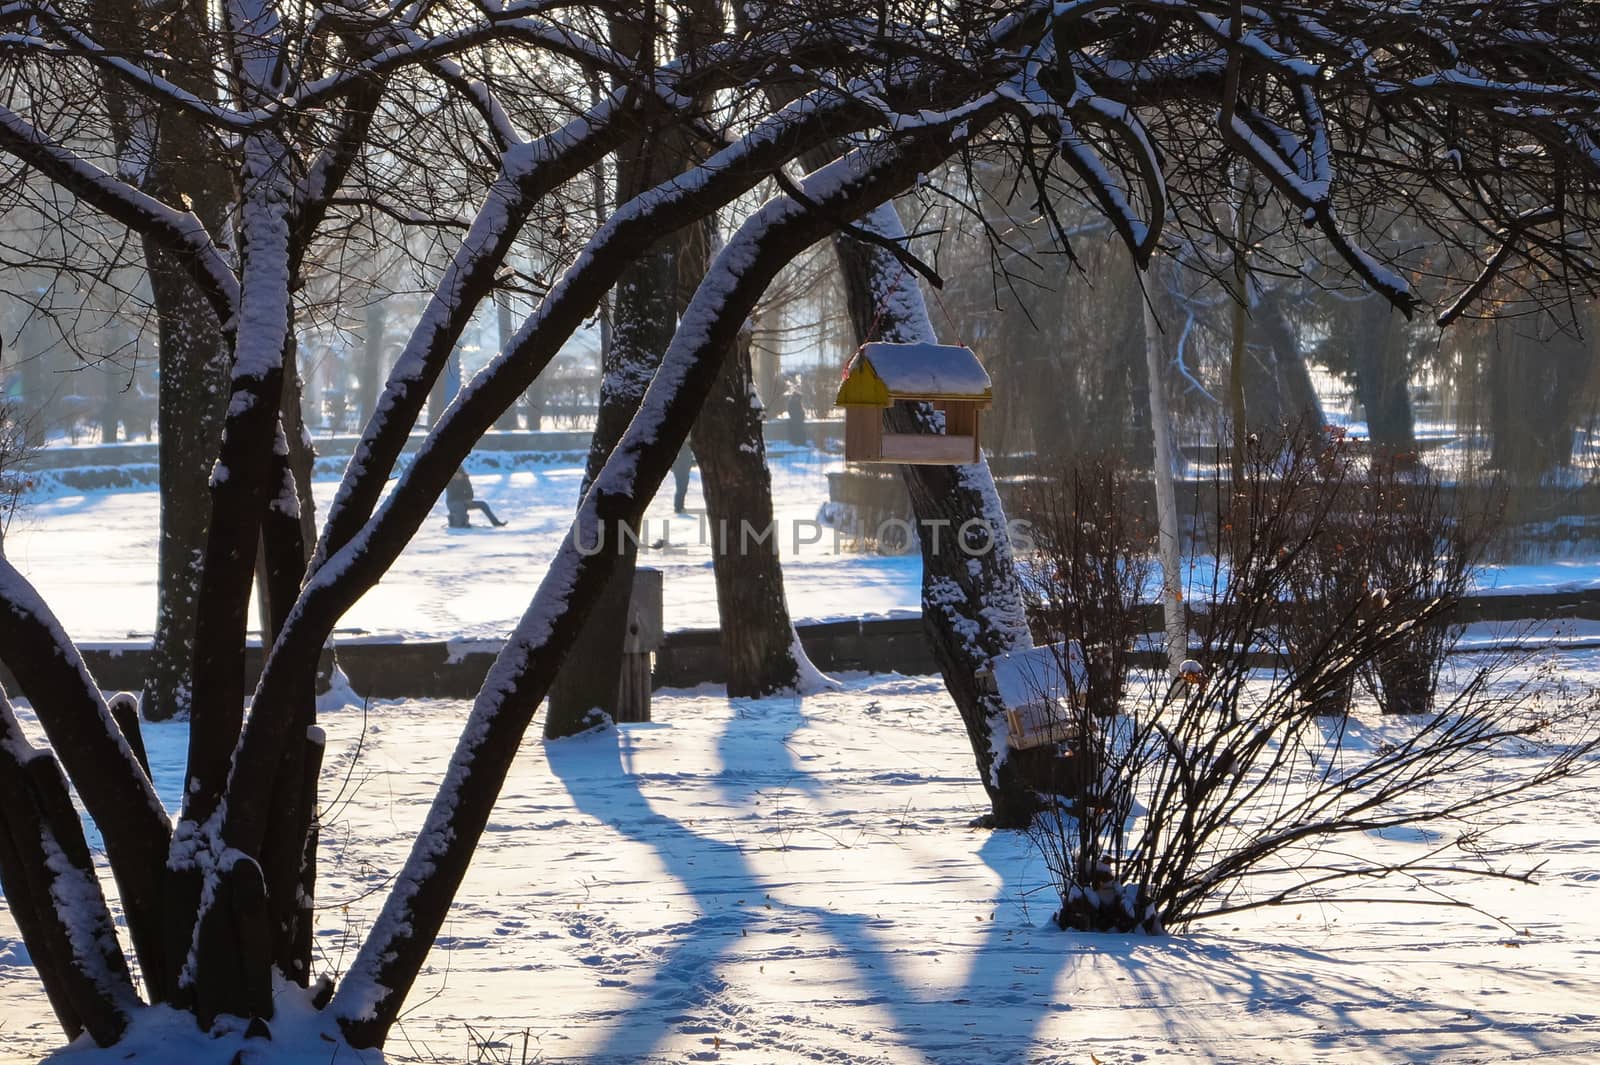 the bird feeder on the tree in the Park winter landscape by Oleczka11